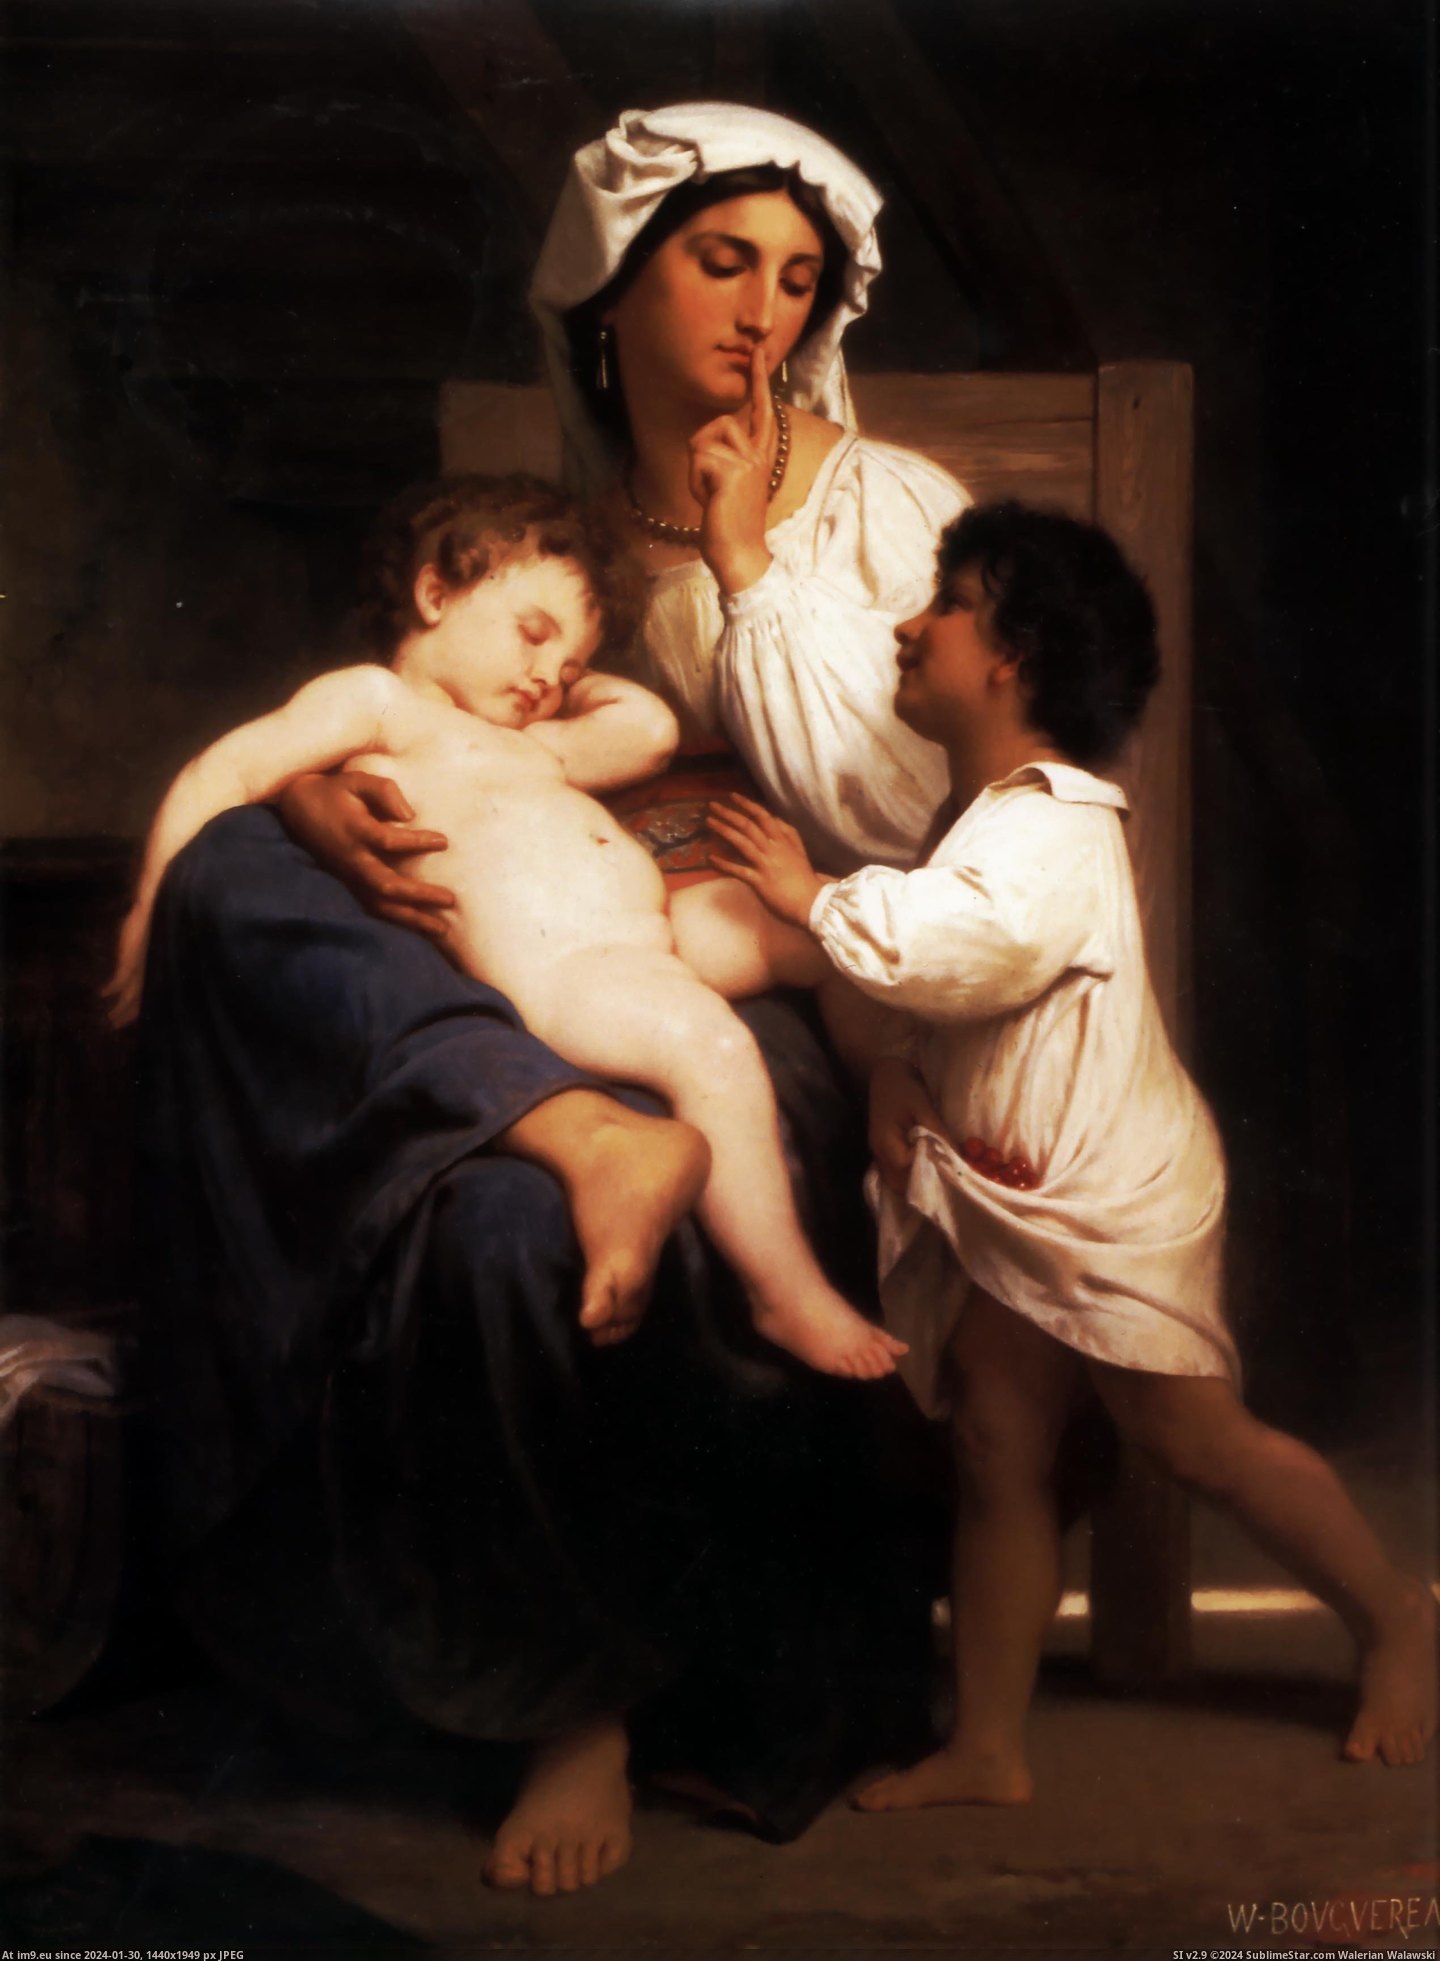 #Art #Painting #Bouguereau #Adolphe #Paintings #William (1864) Le Sommeil - William Adolphe Bouguereau Pic. (Image of album William Adolphe Bouguereau paintings (1825-1905)))